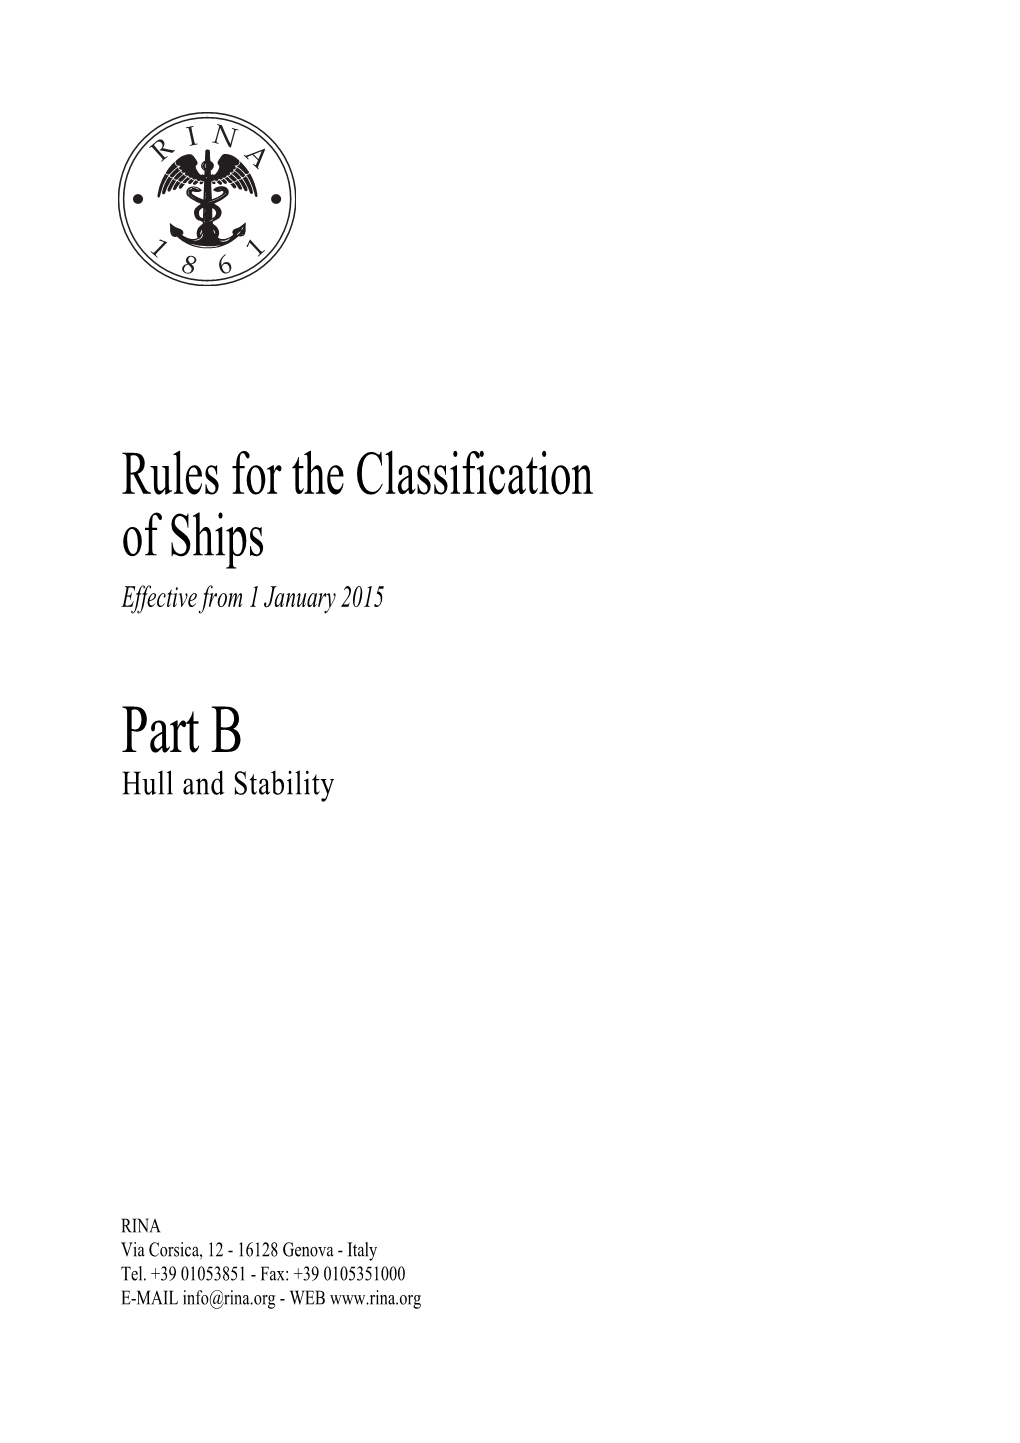 RINA Rules for the Classification 2015 Part B